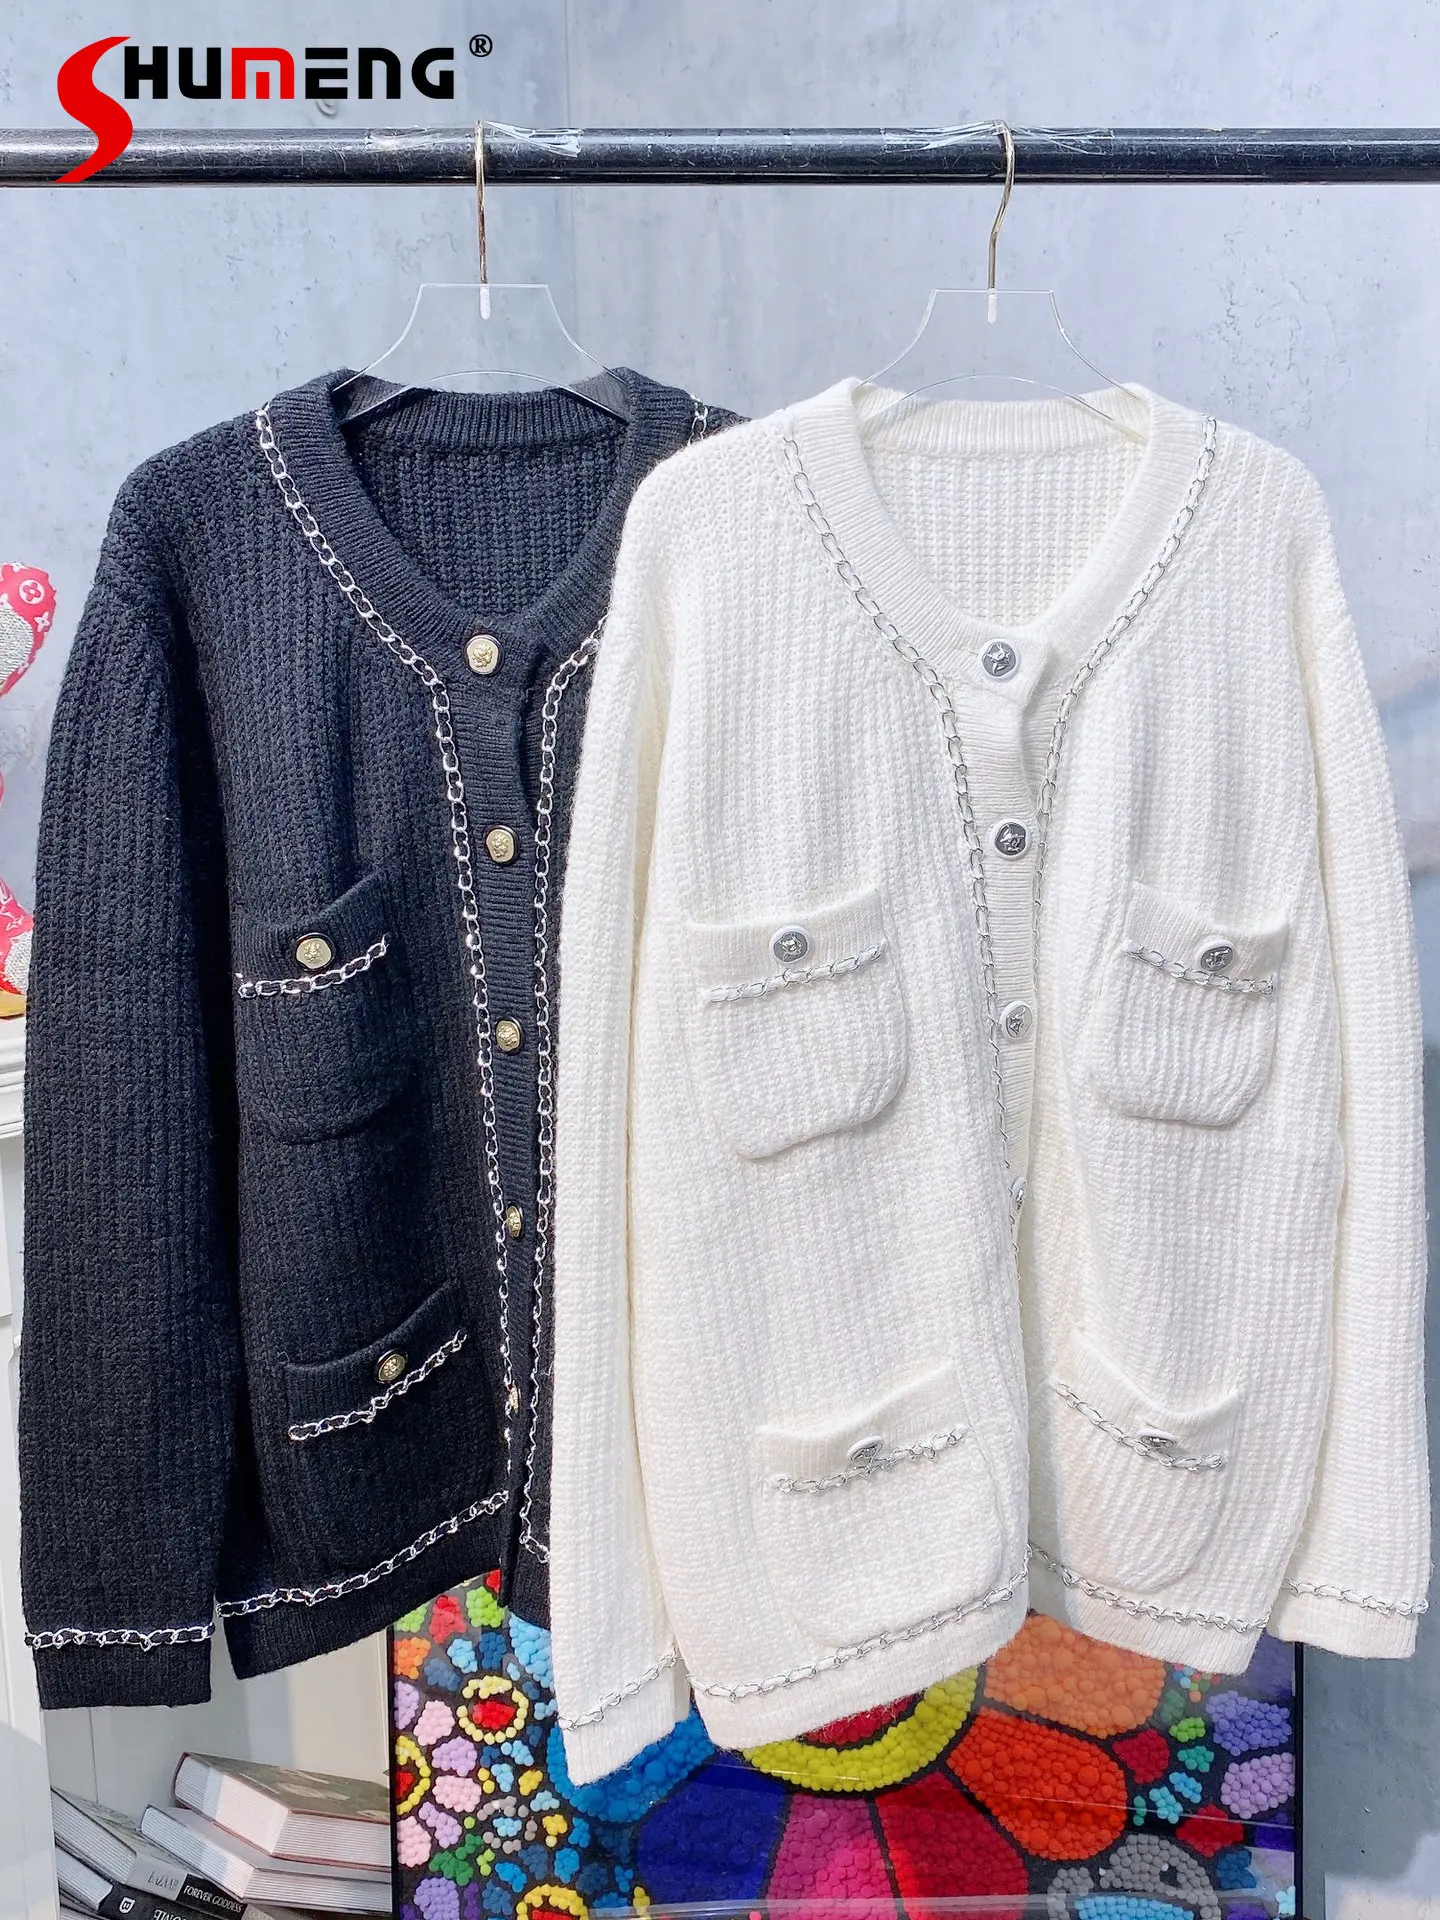 New Women's Fashion Elegant Chain Edge Vintage Knitted Top Ladies Autumn Winter Simple Loose Round Neck Sweater Cardigan Coat